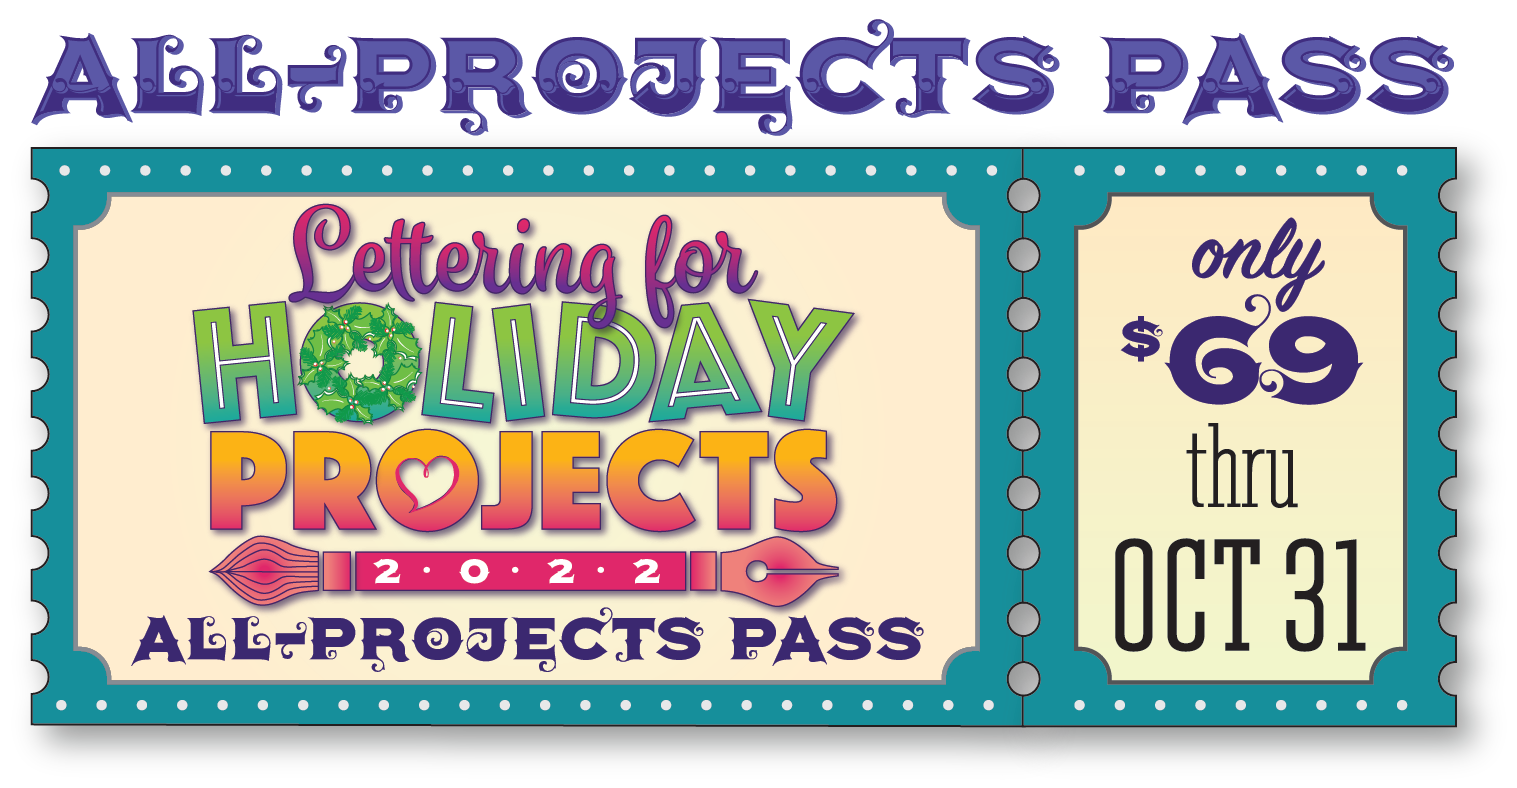 All Projects Pass only $69